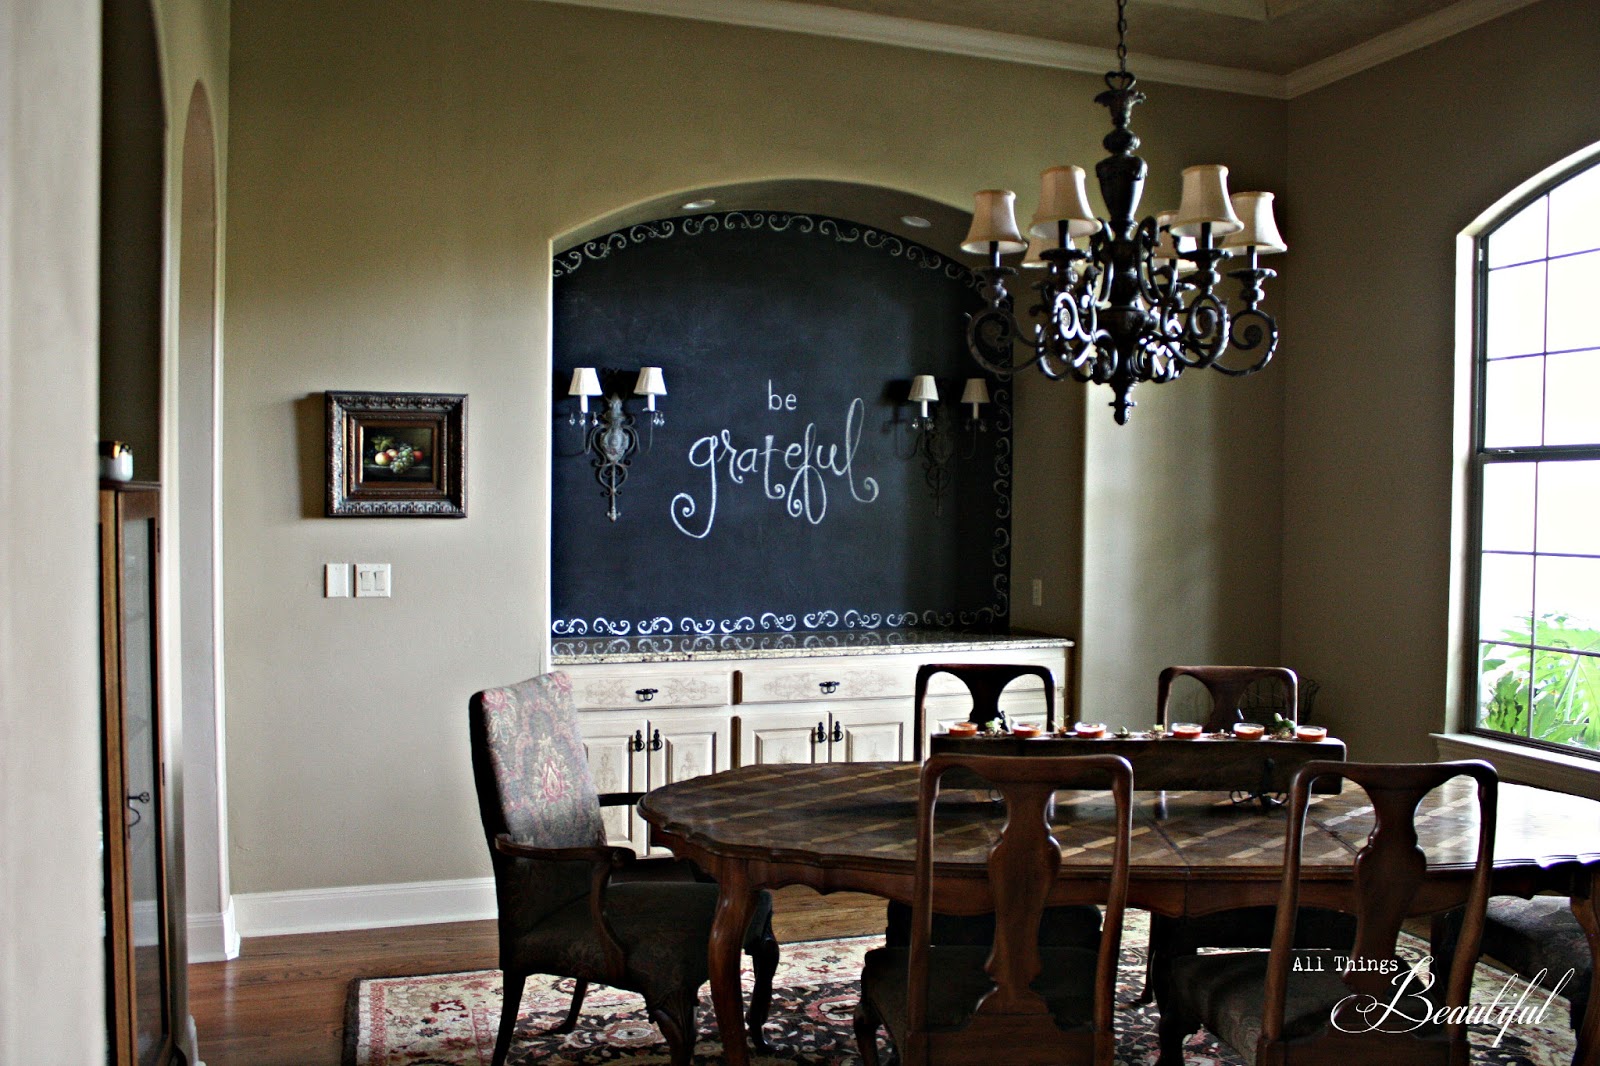 All Things Beautiful Dining Room Chalkboard Wall